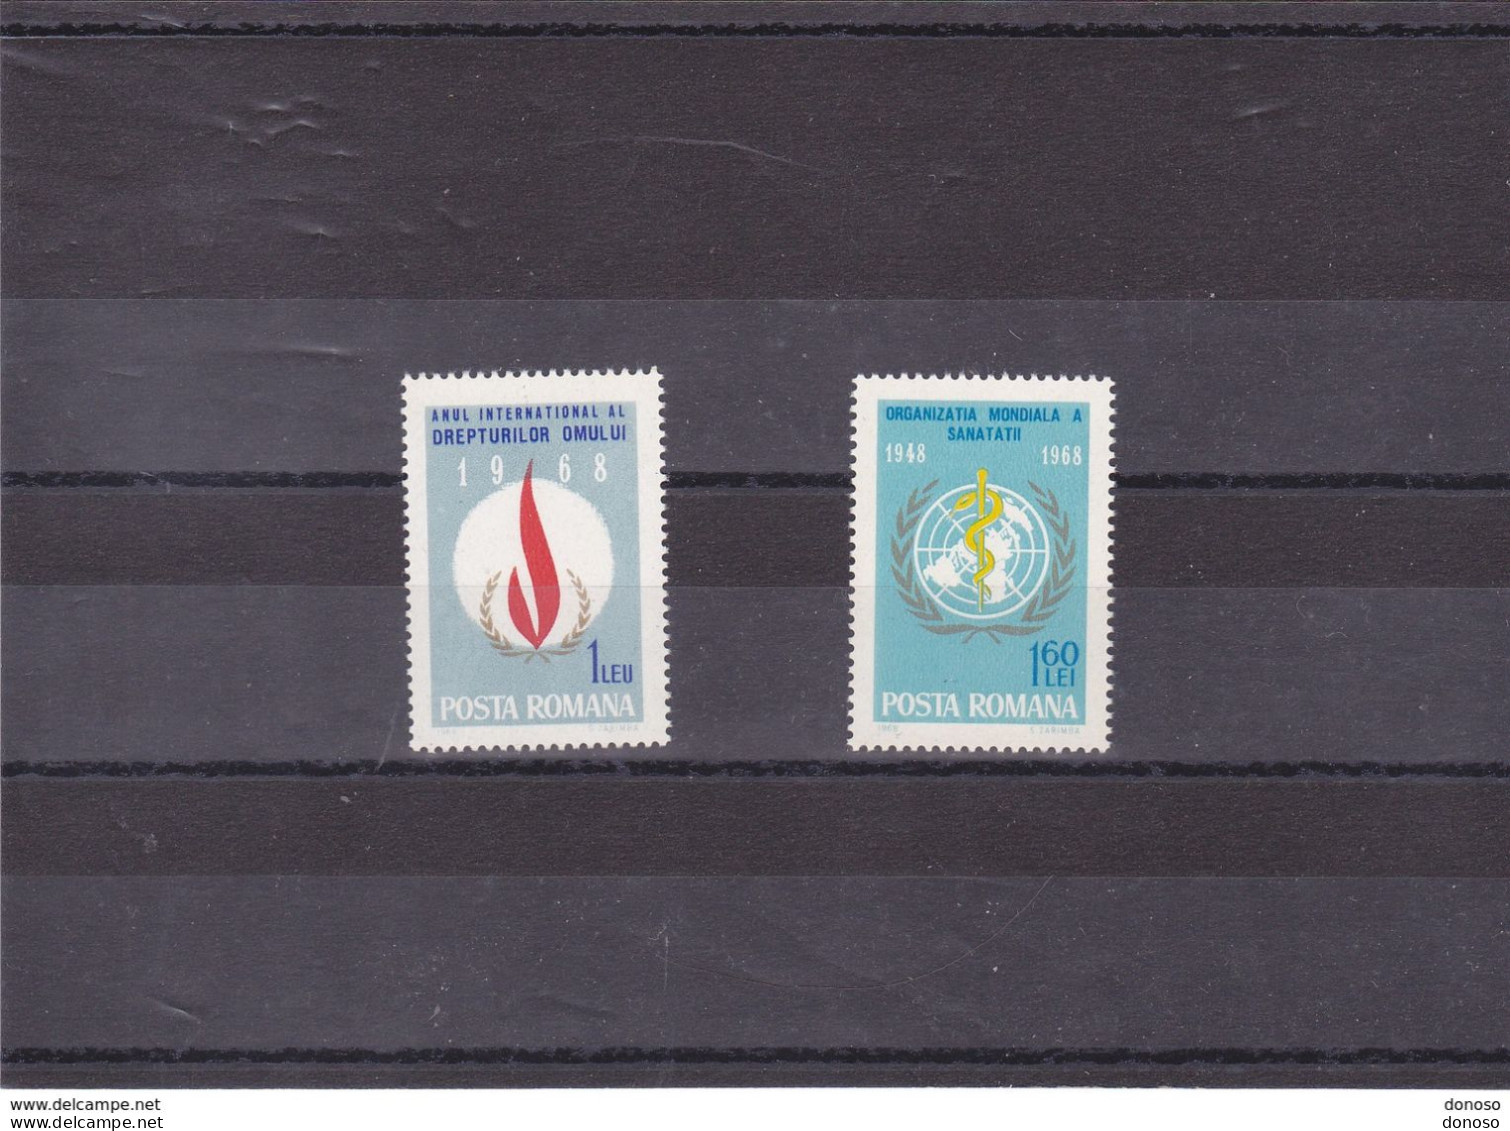 ROUMANIE 1968 OMS Droits De L'homme Yvert 2377-2378, Michel 2674-2675 NEUF** MNH Cote Yv 3,50 Euros - Unused Stamps